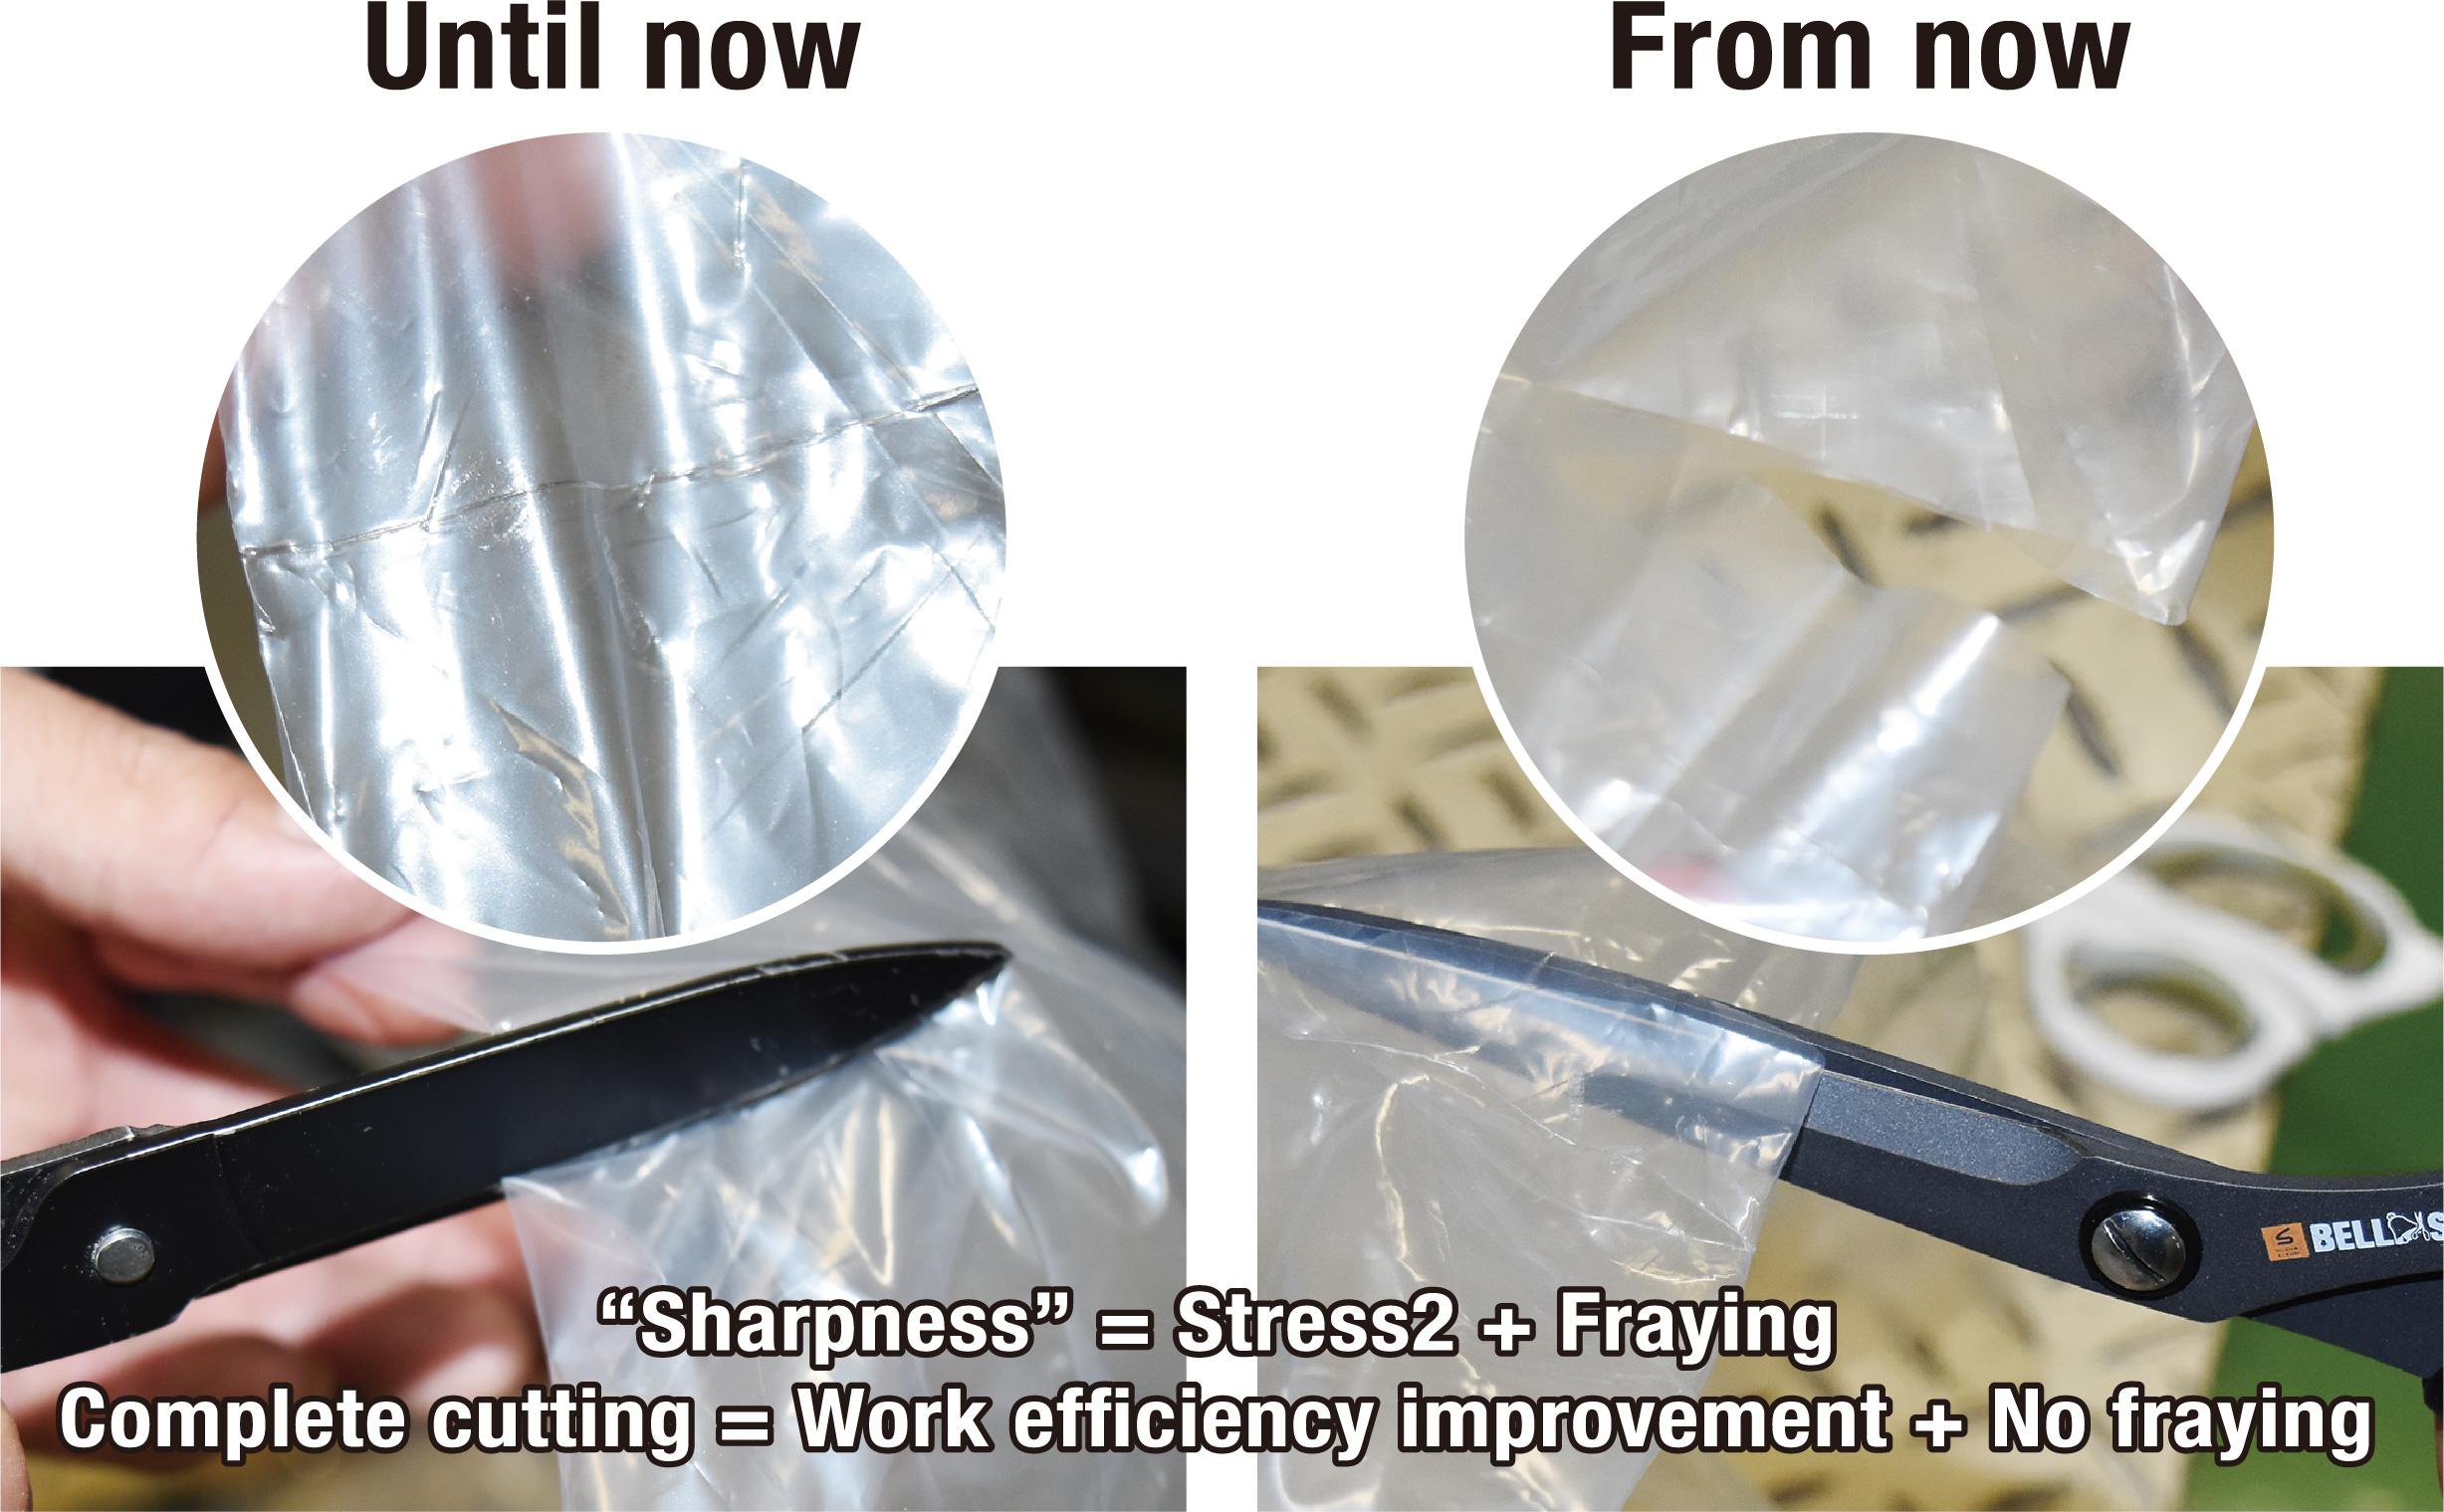 Complete cutting = Work efficiency improvement + No fraying